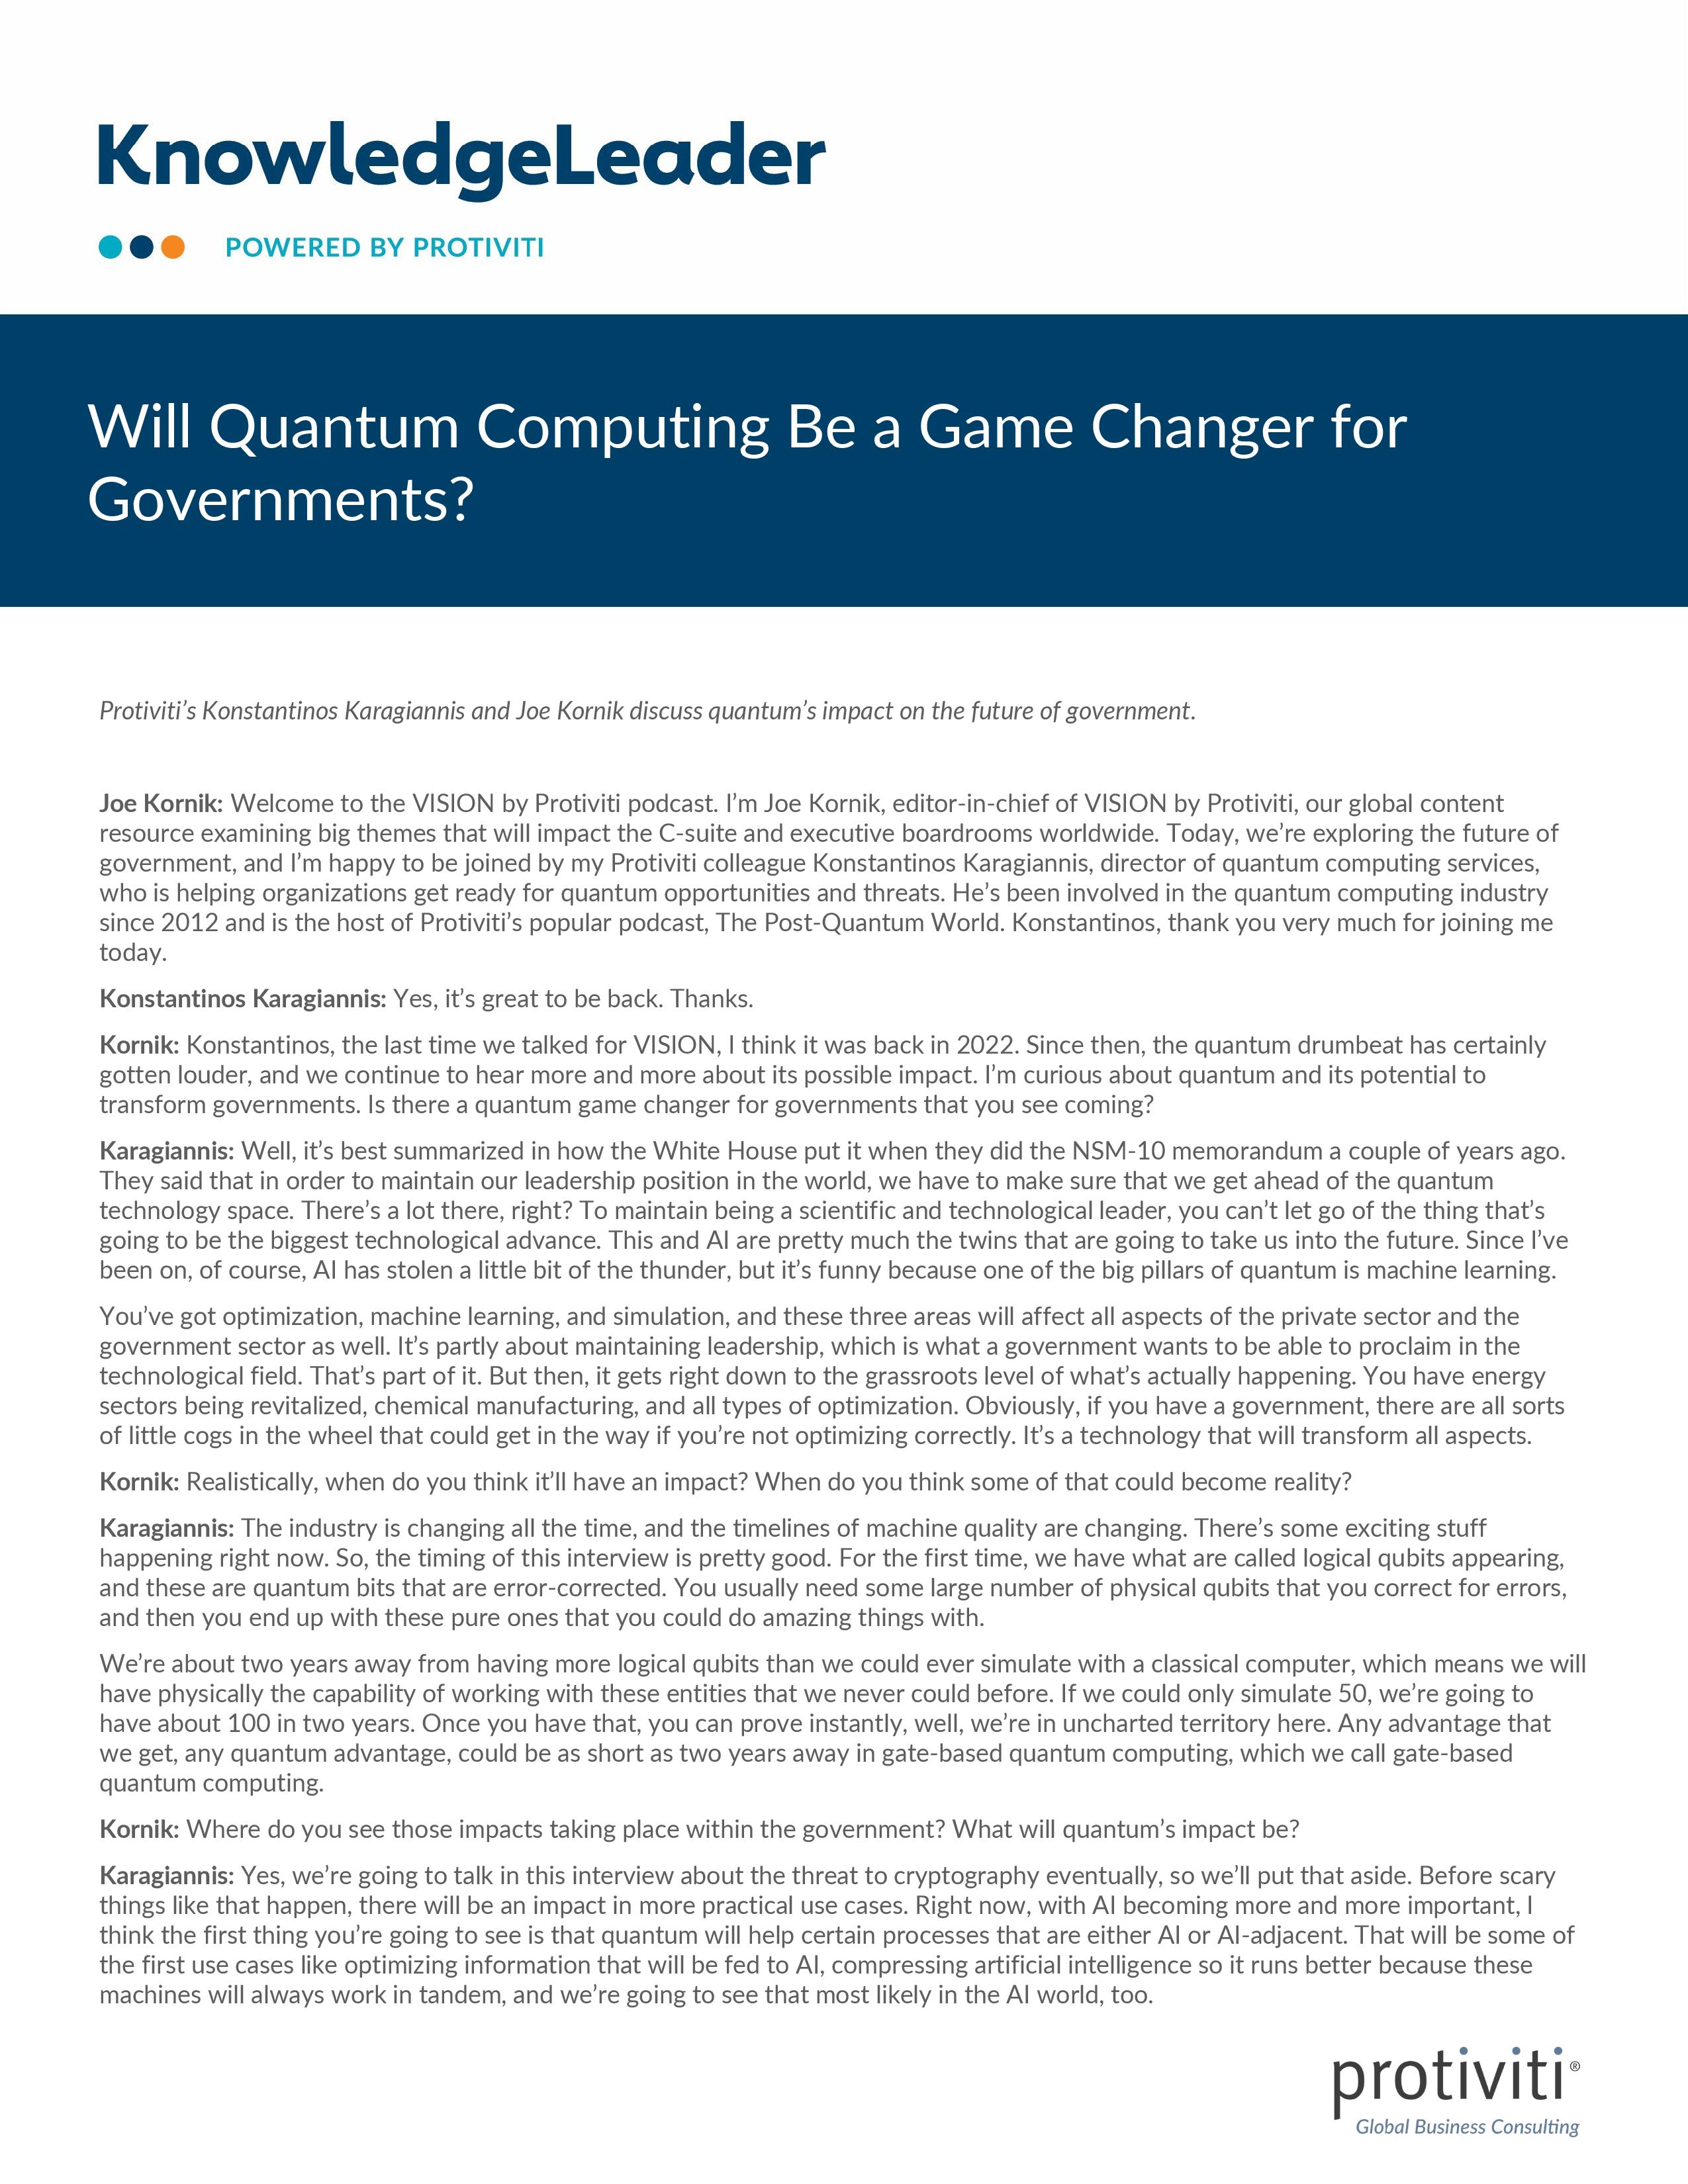 screenshot of the first page of Will Quantum Computing Be a Game Changer for Governments